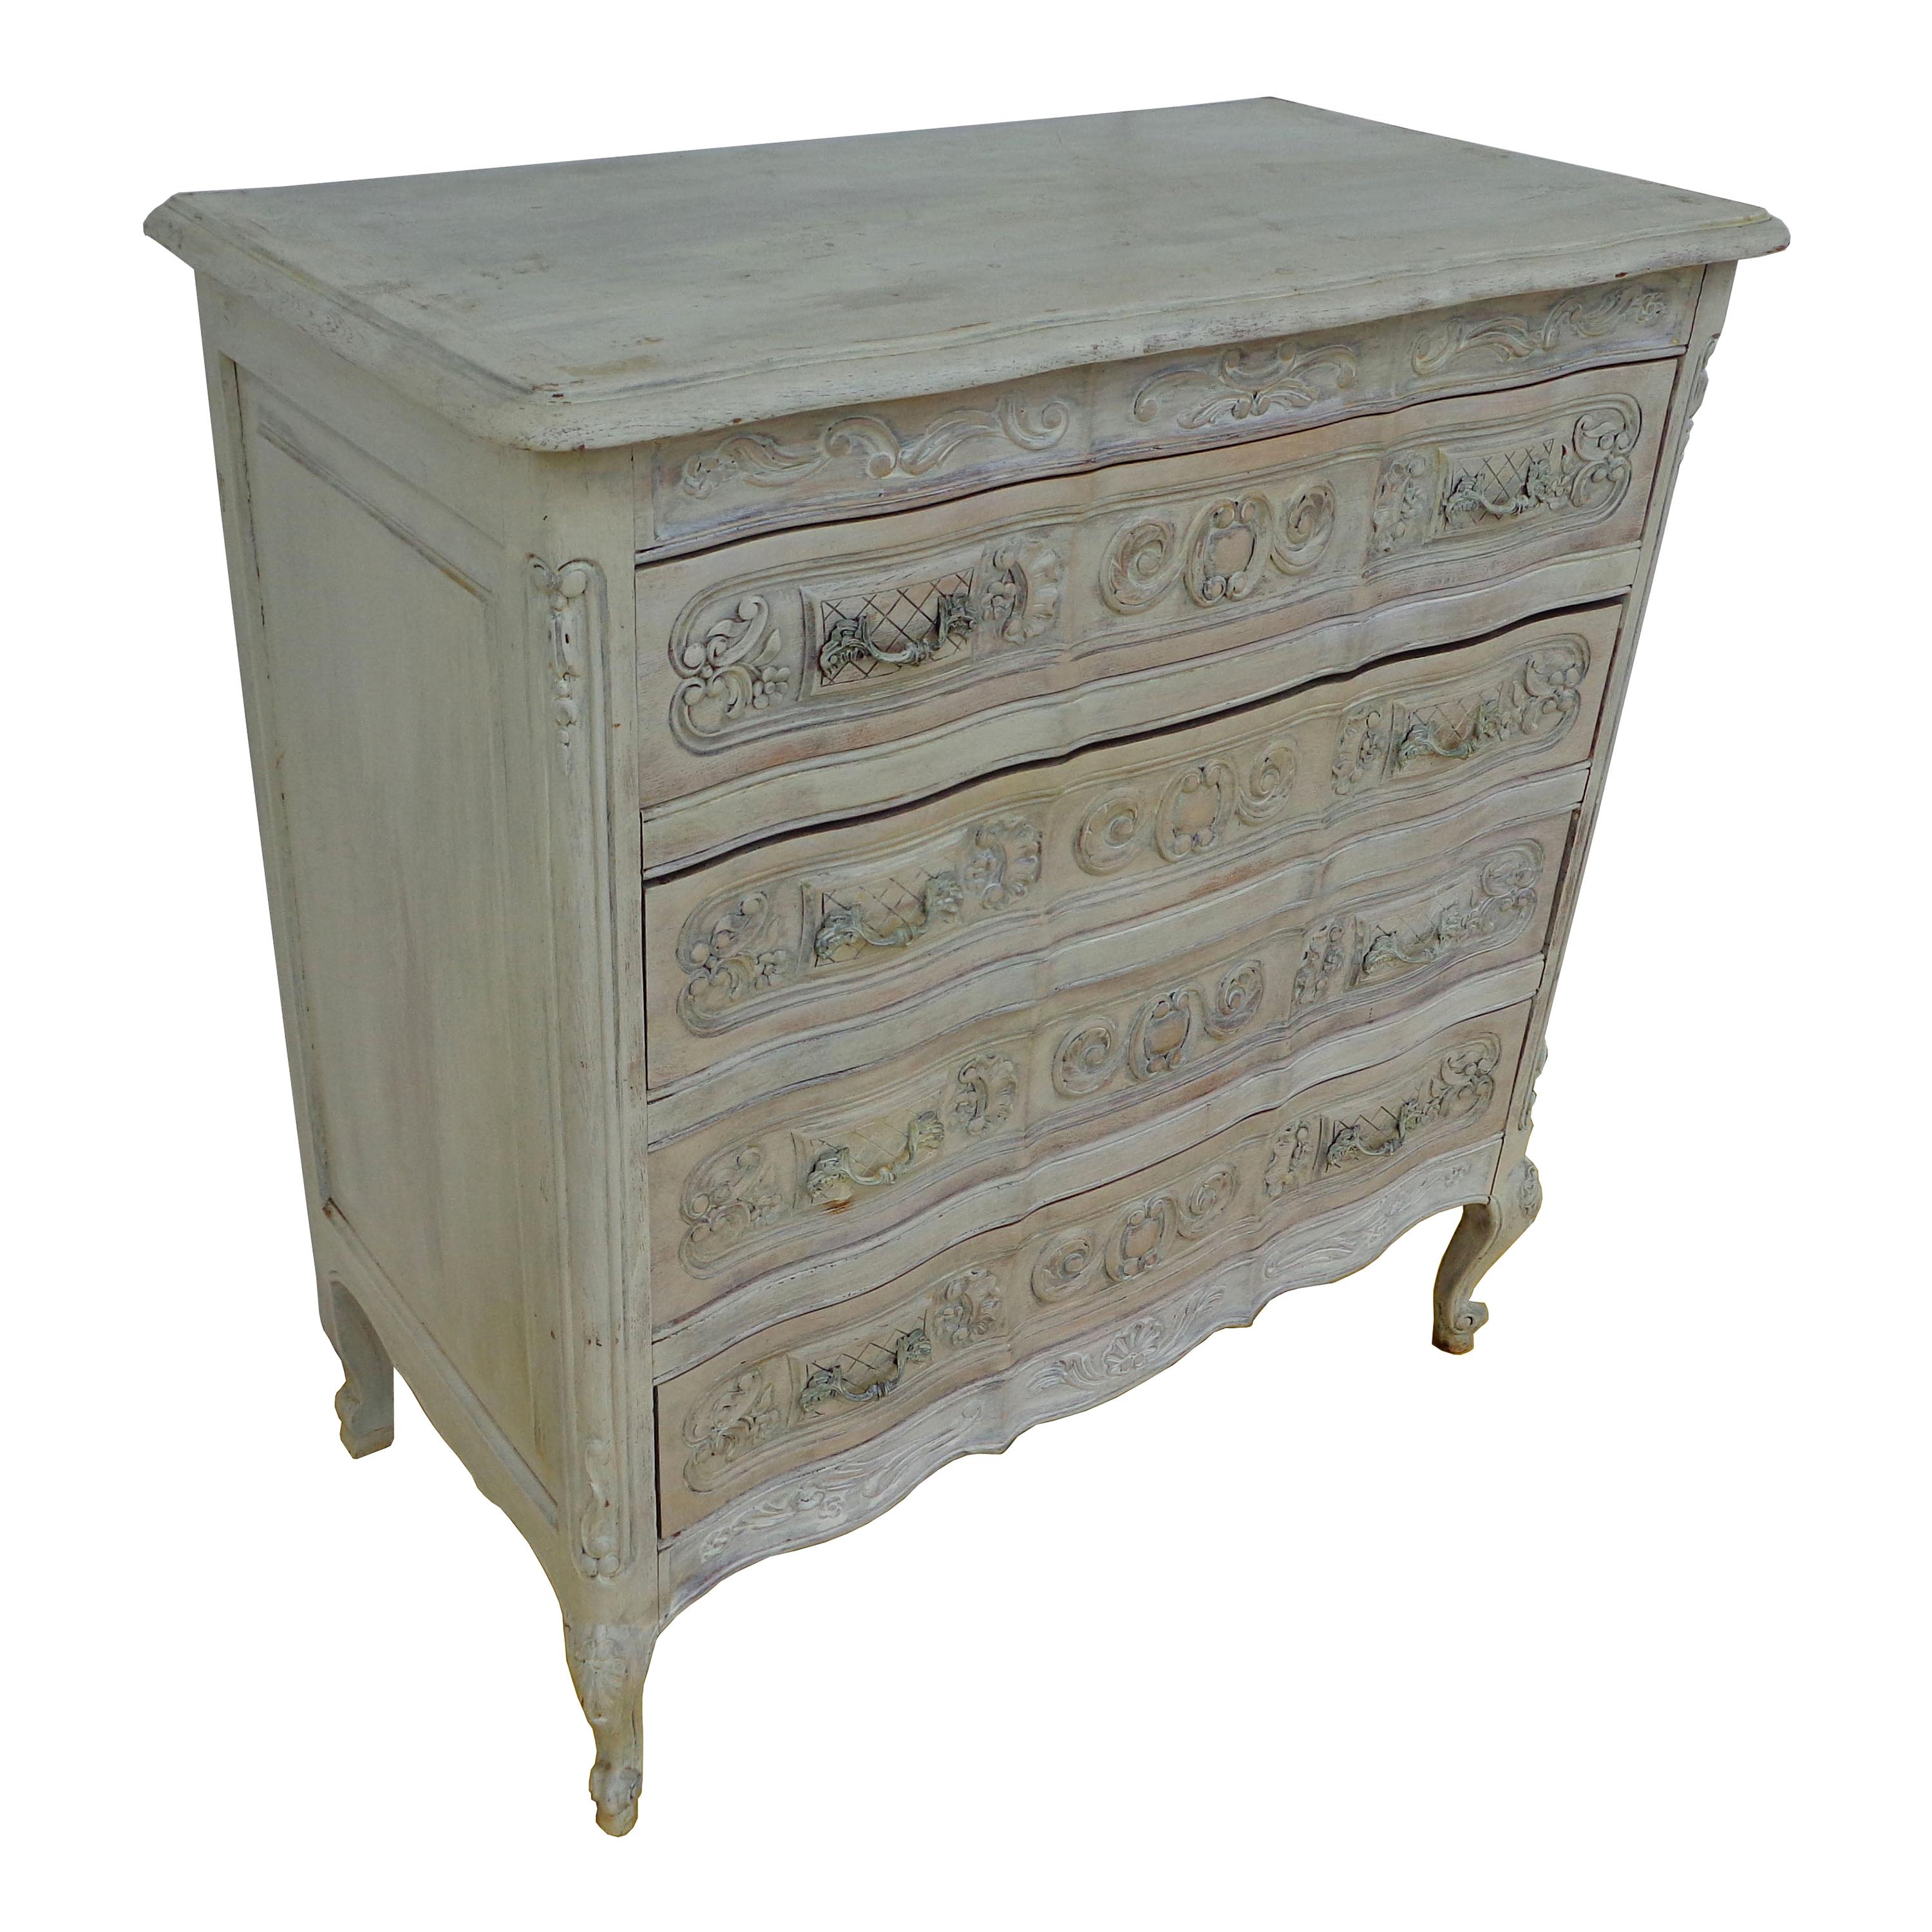 Louis the xv Style French Provencial Painted Dresser